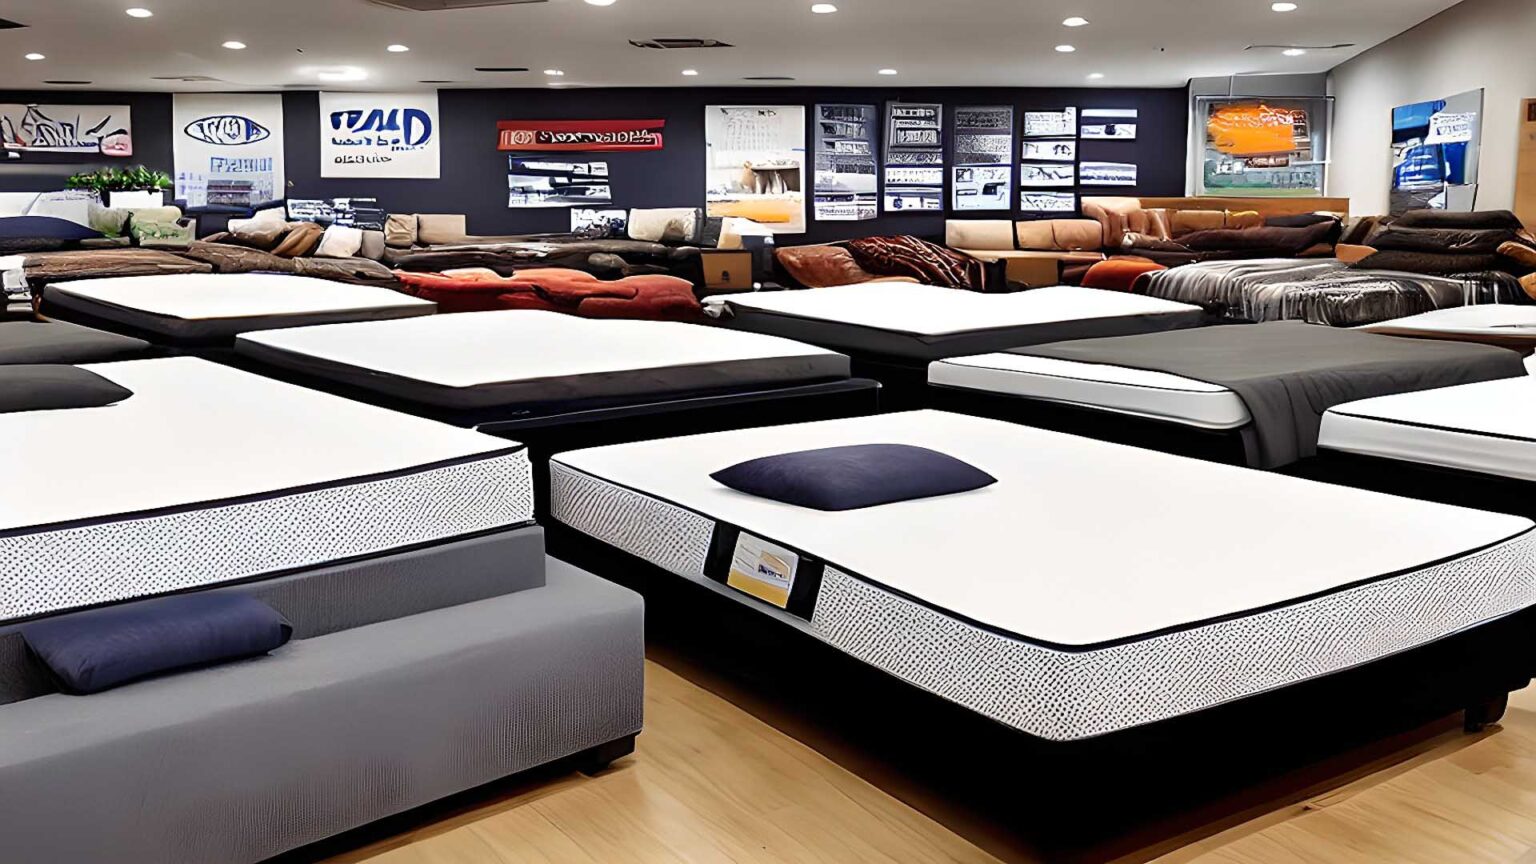 Mattress Stores, mattress dealers, and mattress retailers near me in Cape Coral, FL